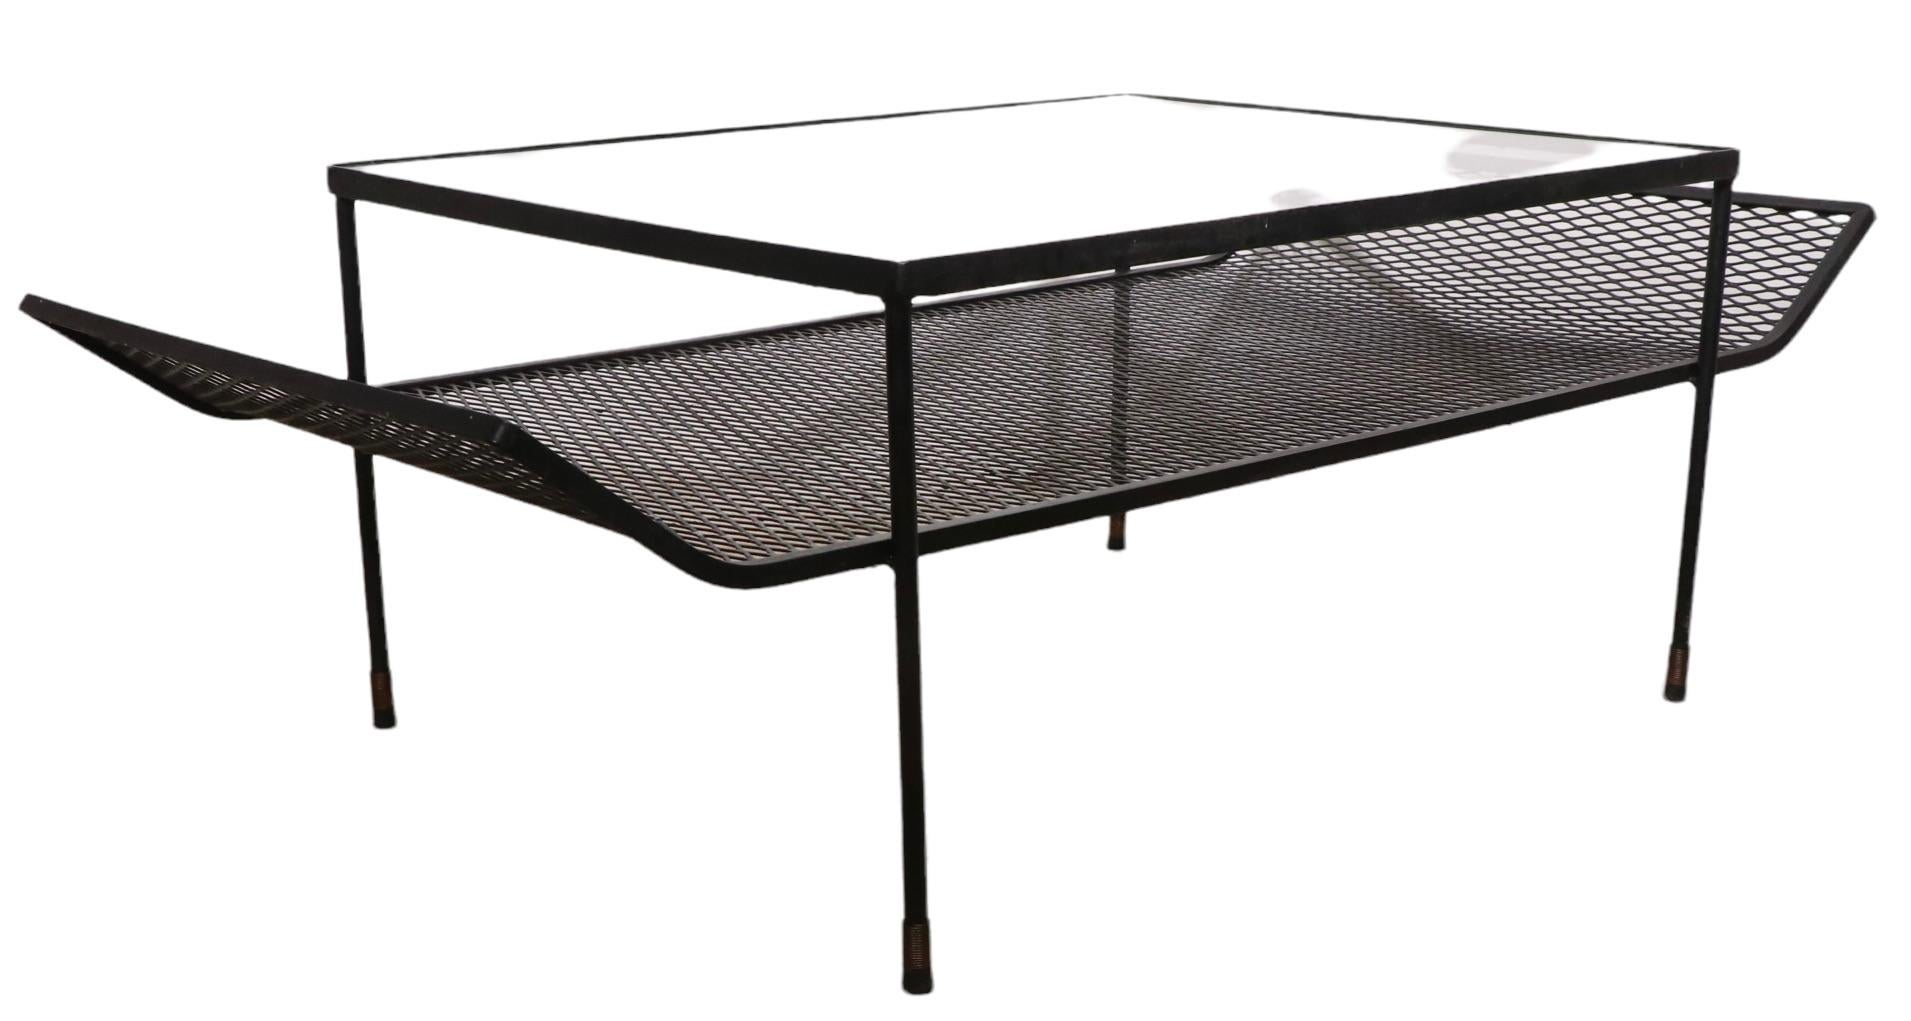 American  Architectural Mid-Century Wrought Iron and Glass Coffee Table Att. to Woodard  For Sale